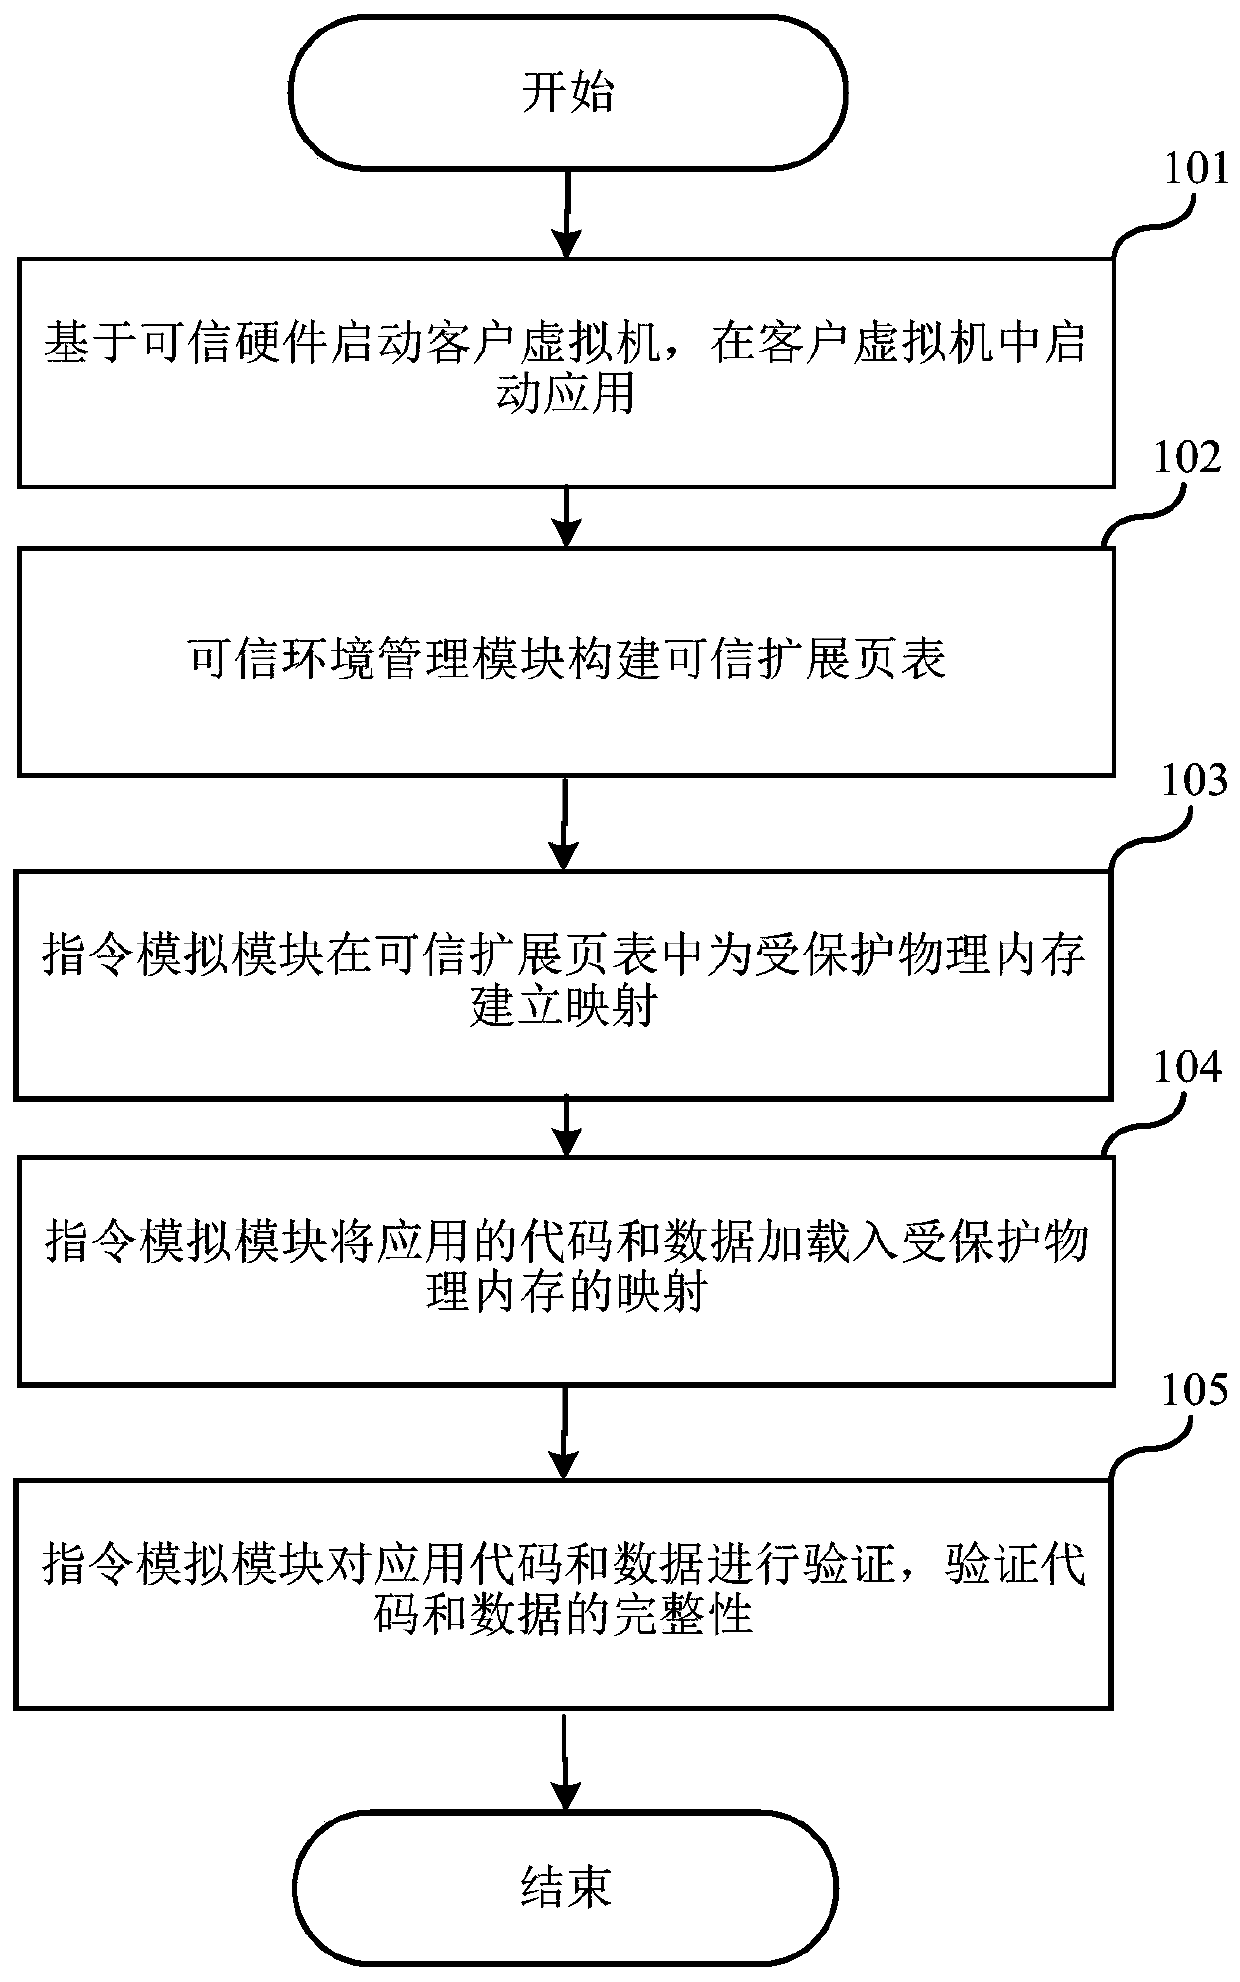 Virtual machine monitor and virtual trusted execution environment construction method